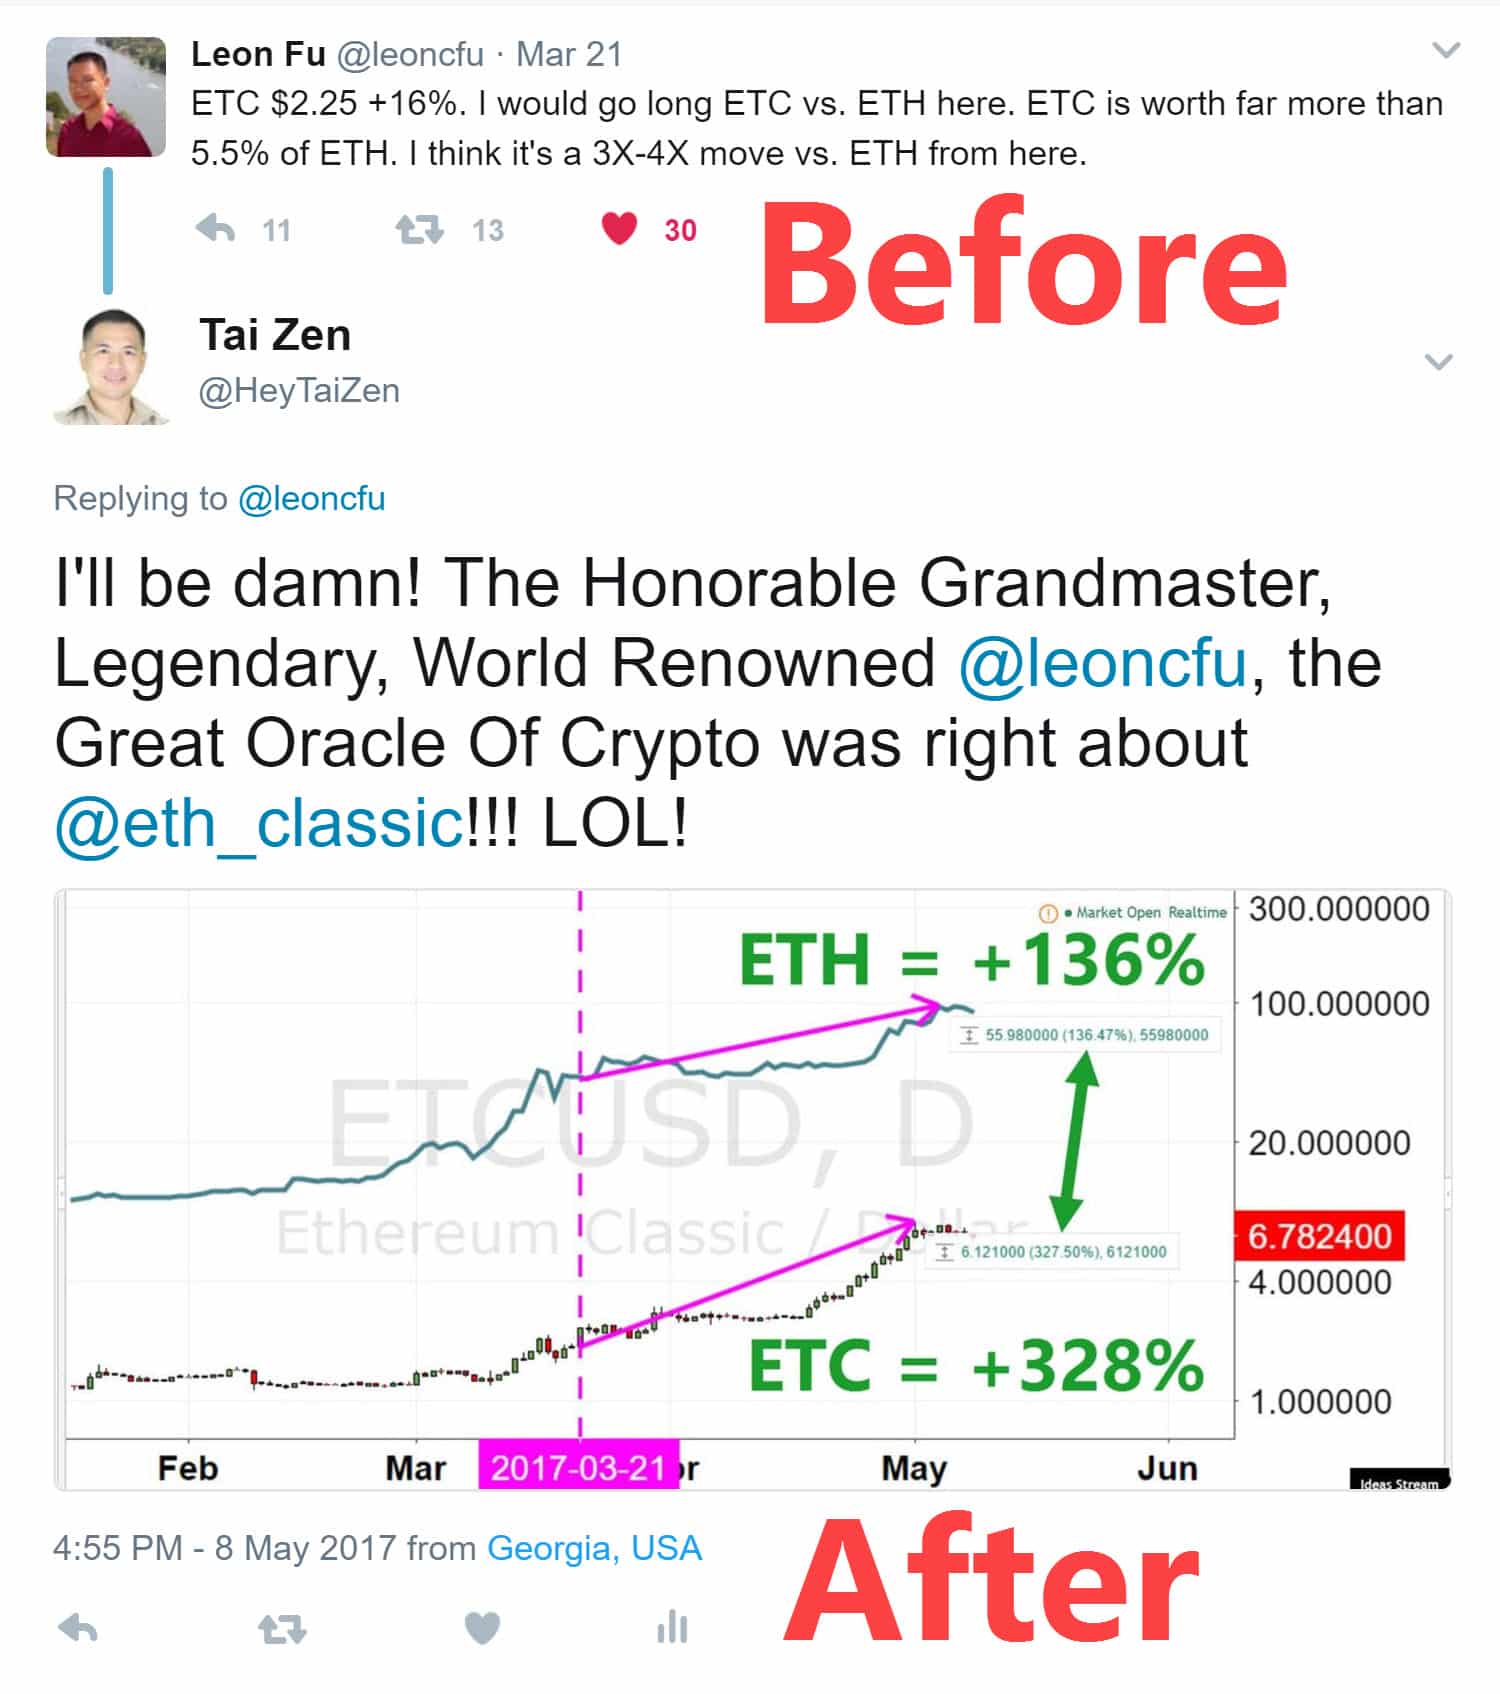 2017-03-21 Leon Makes call that ETC is better ROI then ETH 4